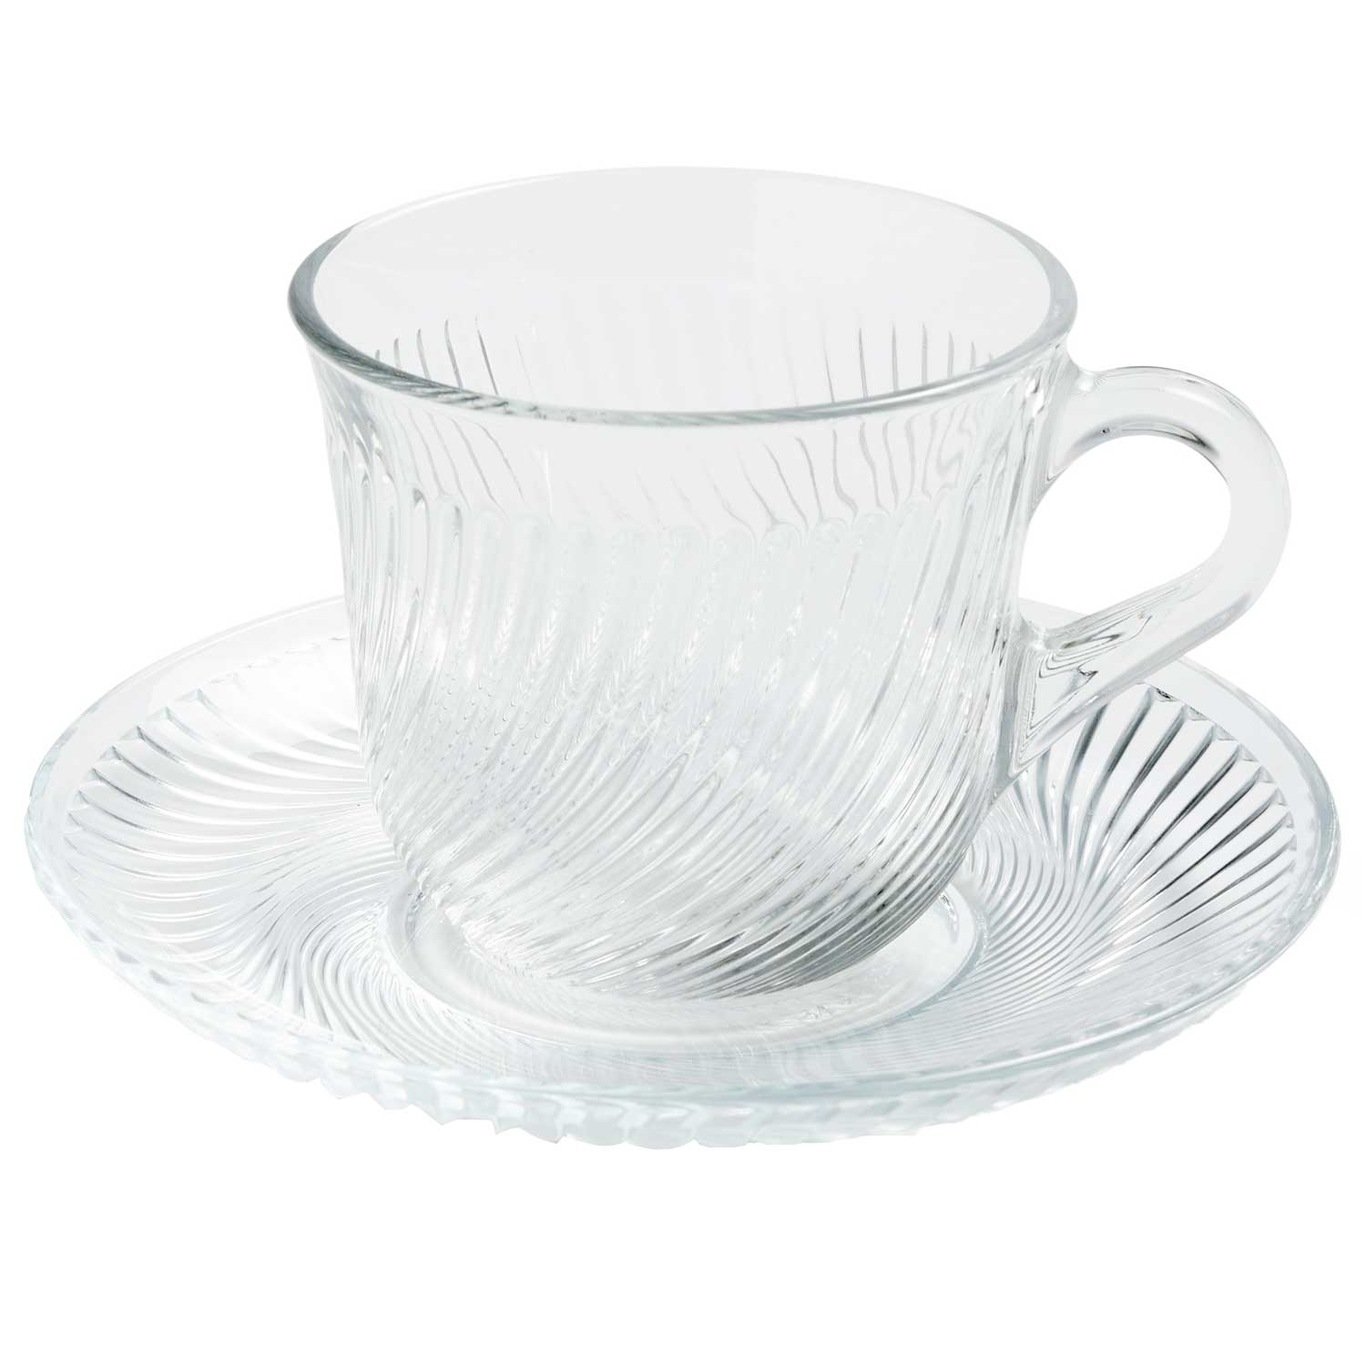 Pirouette Cup & Saucer, 15 cl